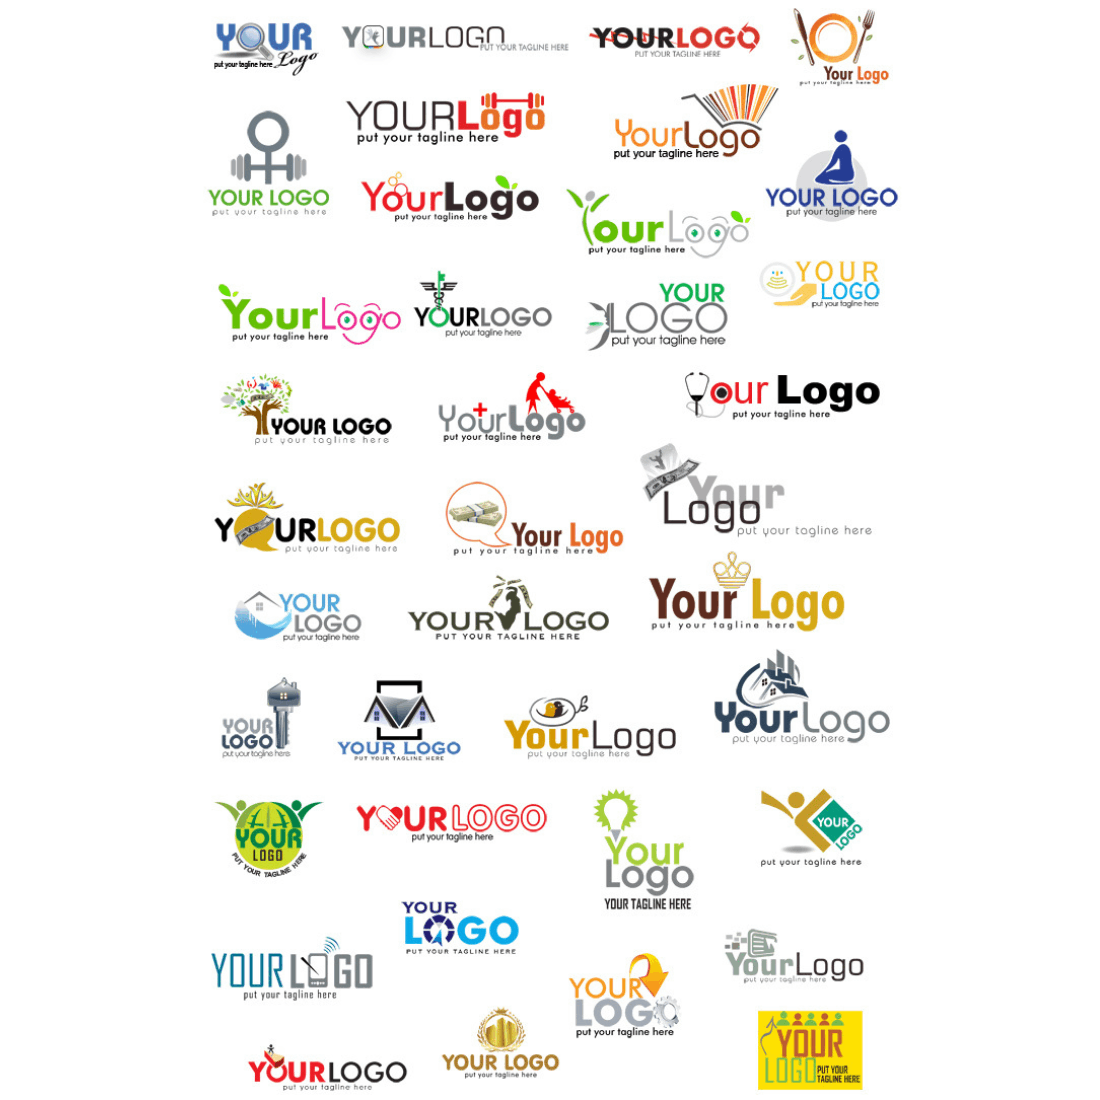 Logos are shown on a white background.